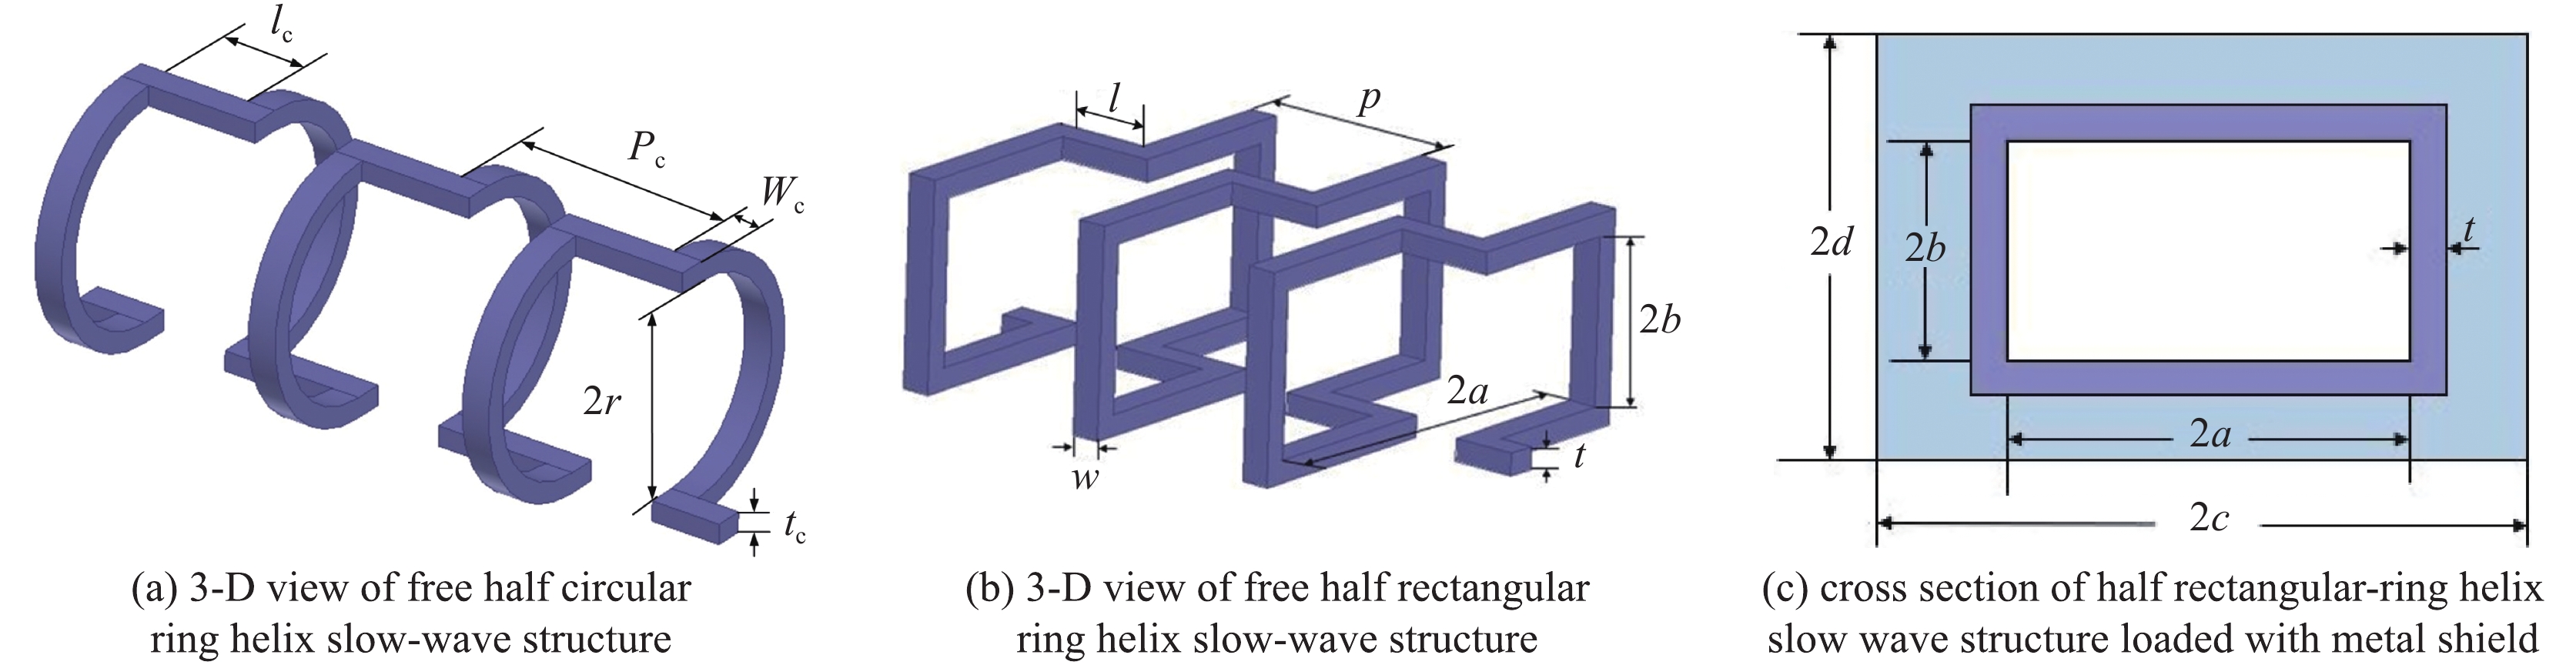 Model of half circular ring helix slow wave structure and half rectangular ring helix slow-wave structure